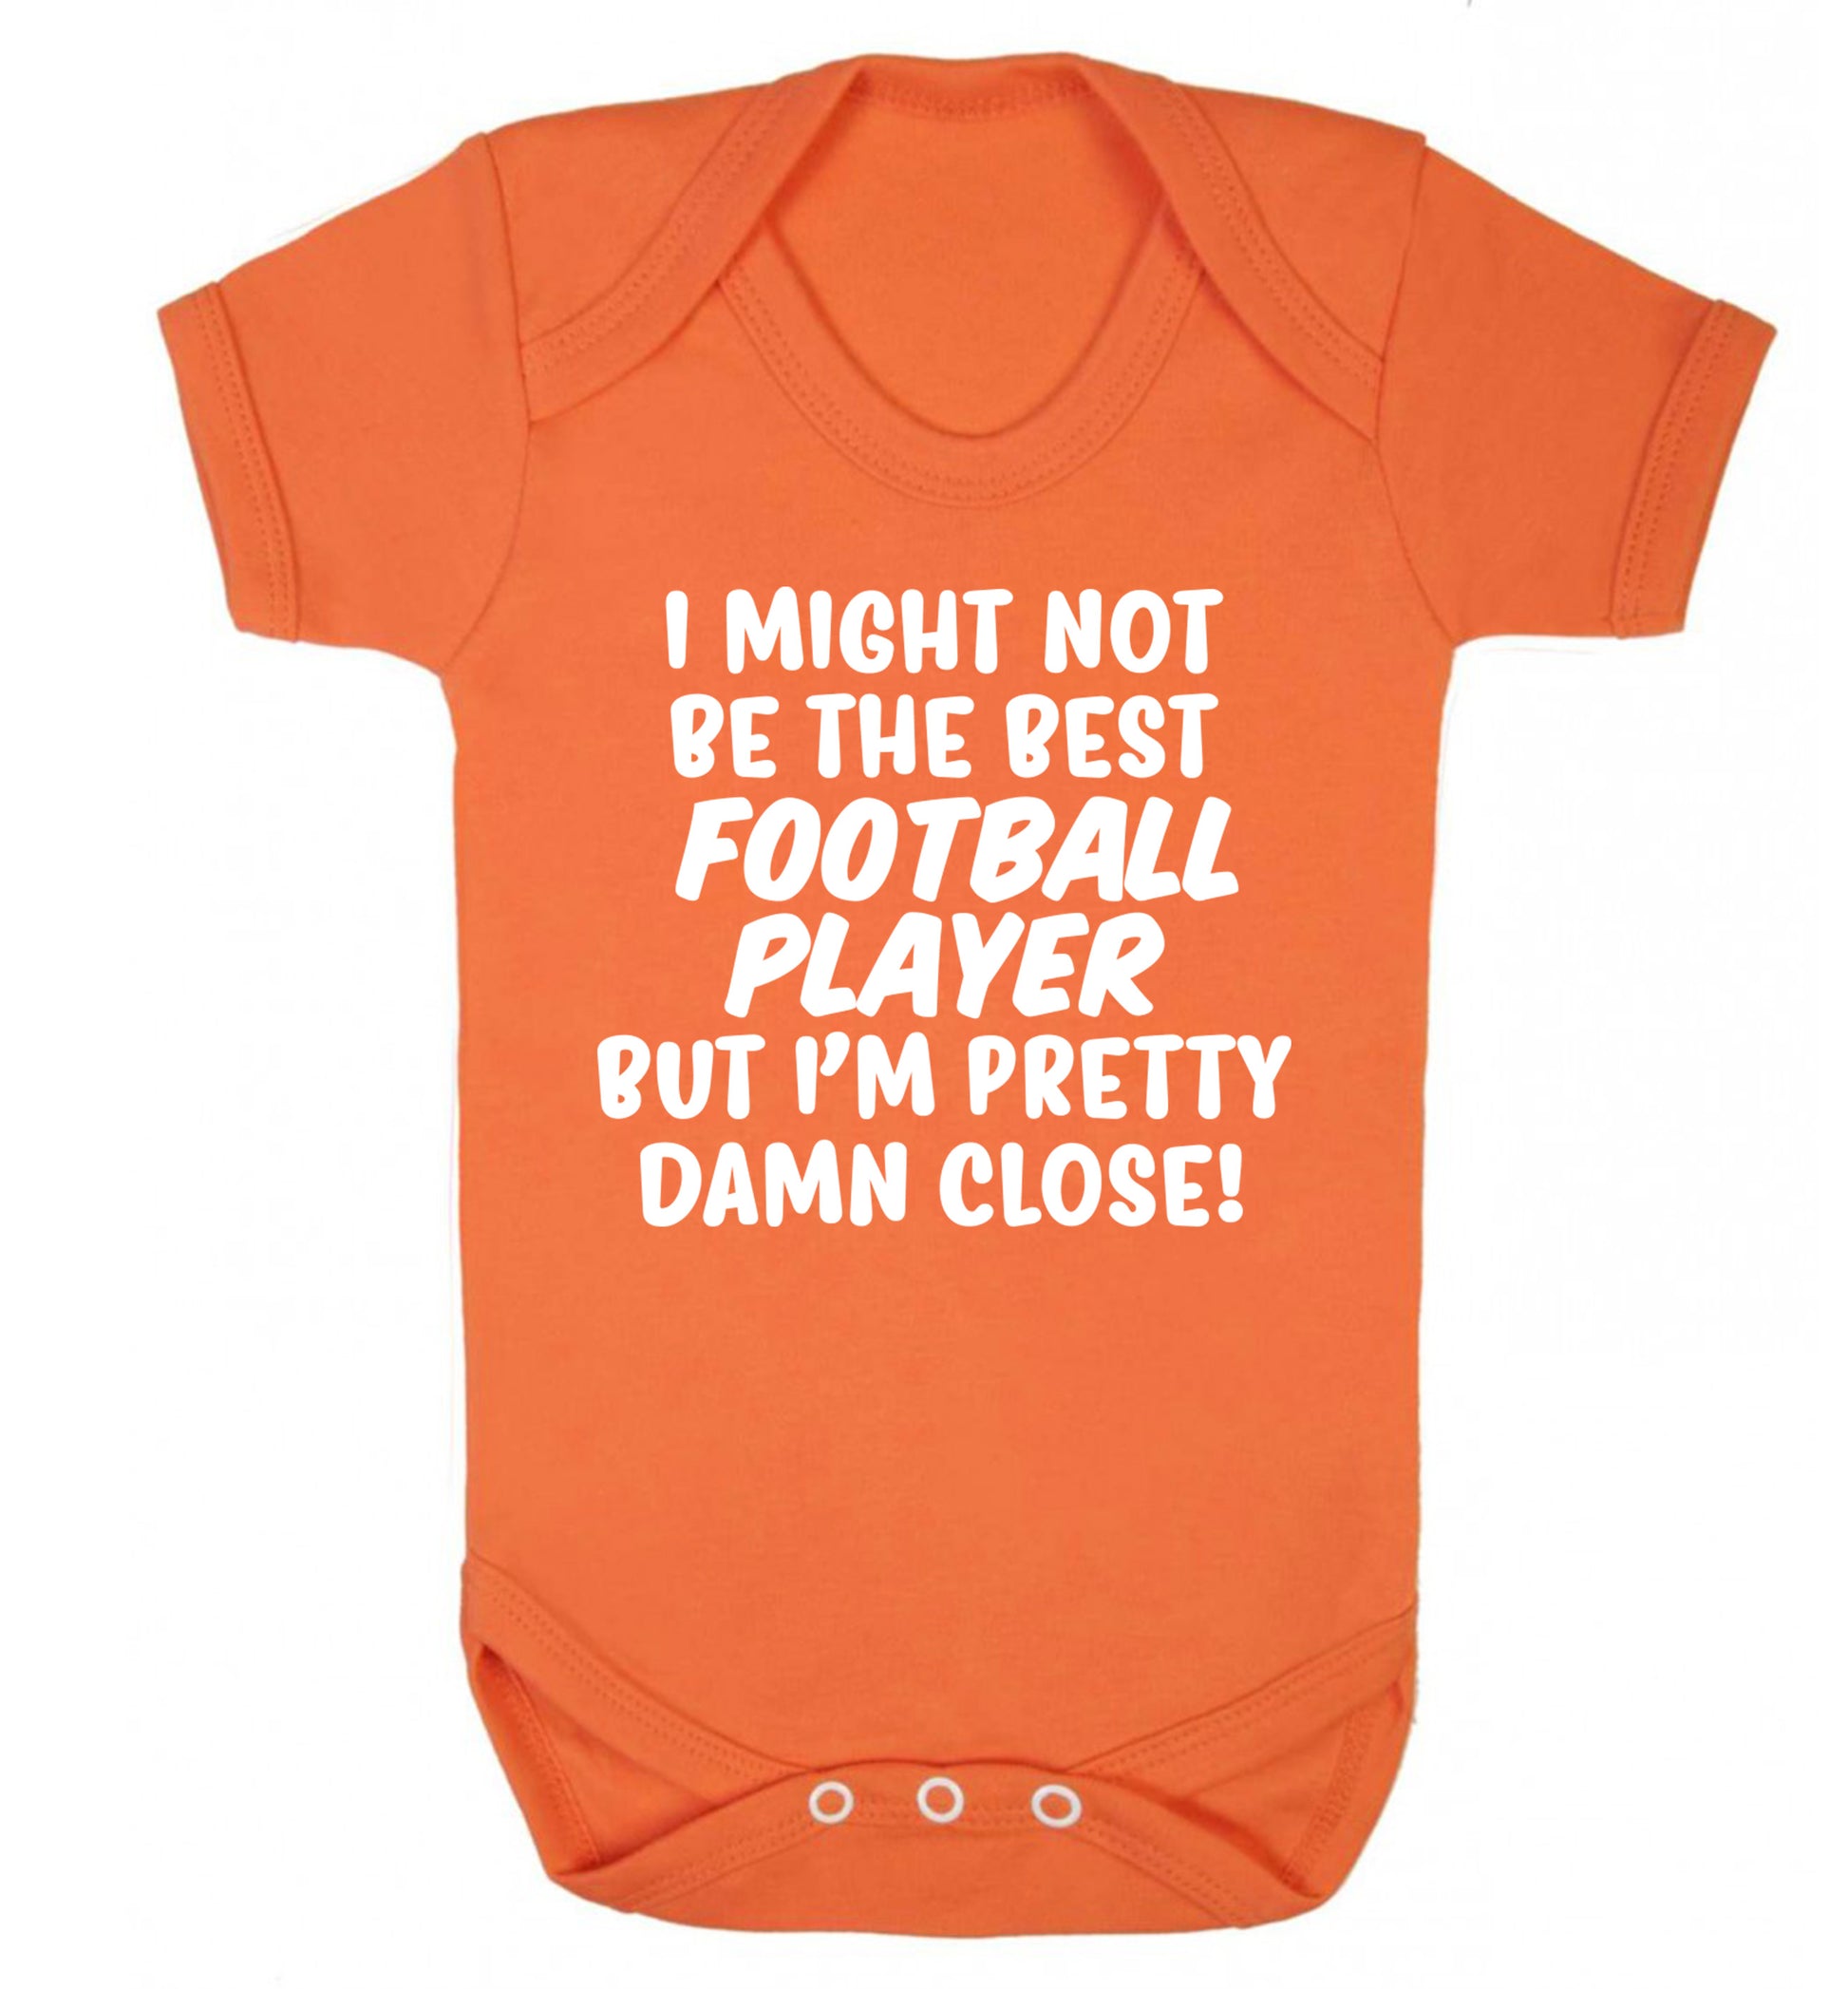 I might not be the best football player but I'm pretty close! Baby Vest orange 18-24 months